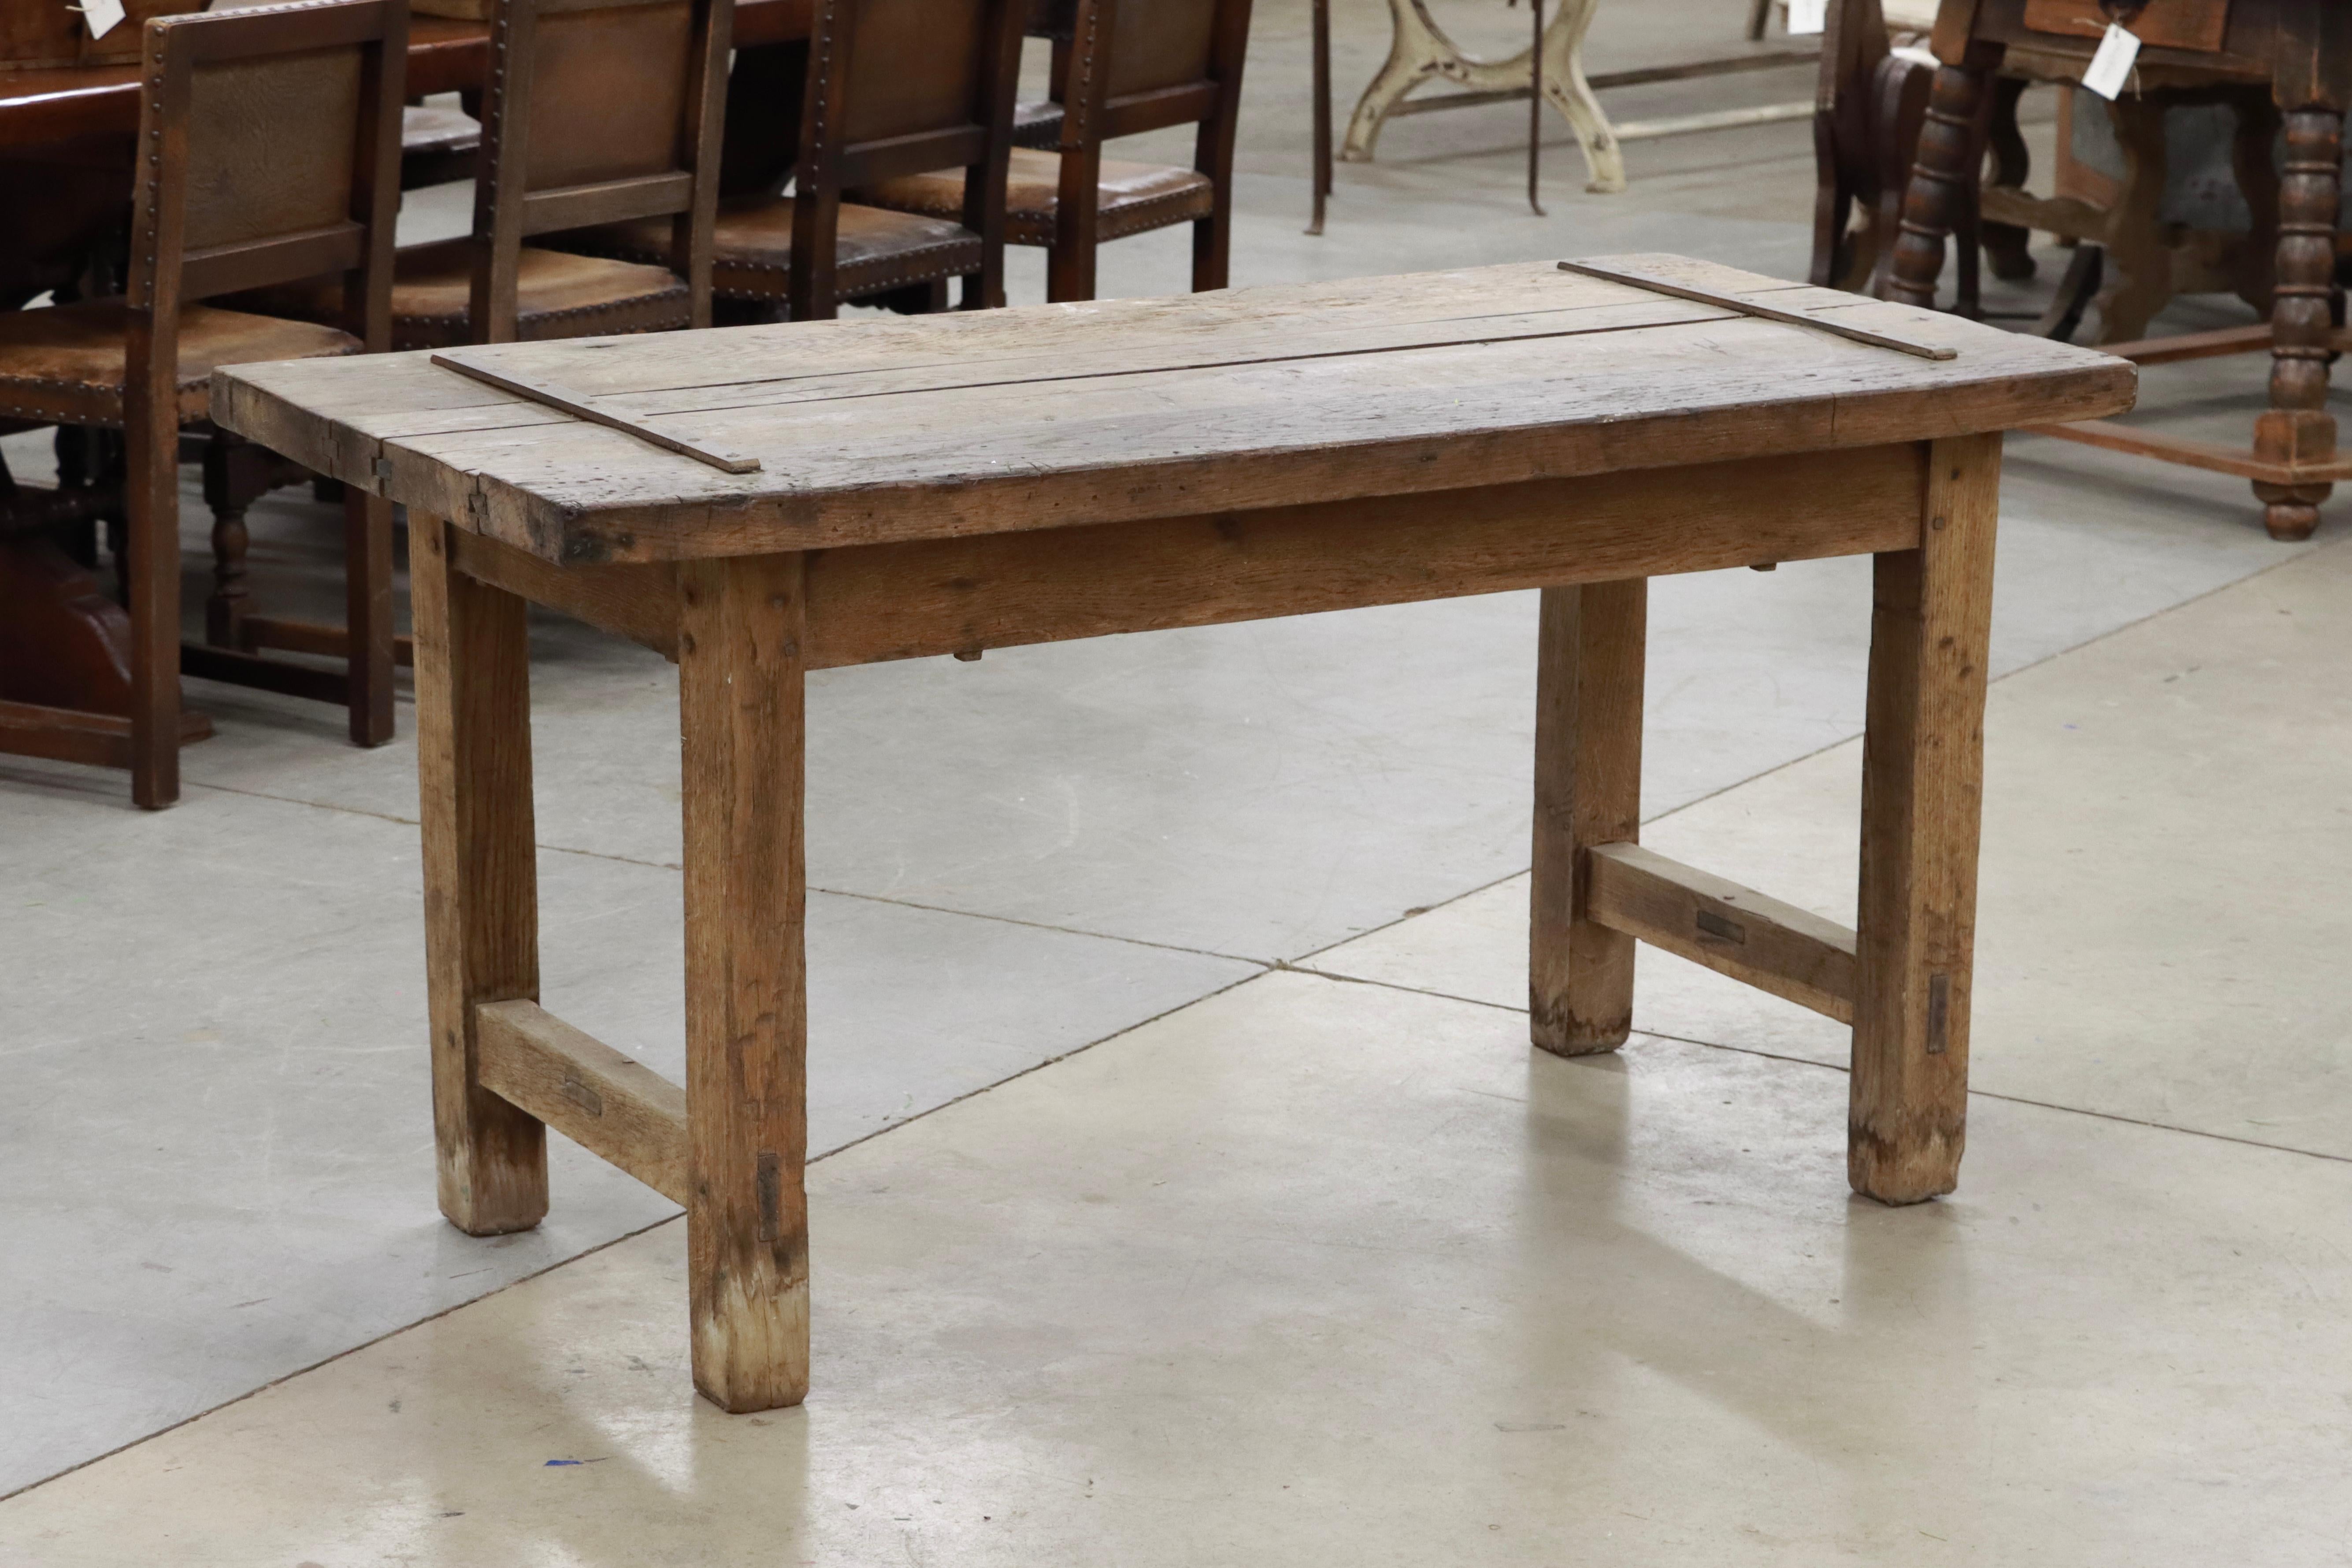 Very substantial and unique antique oak wood table. The top is a thick and chunky ancient French jailhouse door (ca. 1600's) married with a 19th c French oak base.

Would make an excellent dining table or desk! 